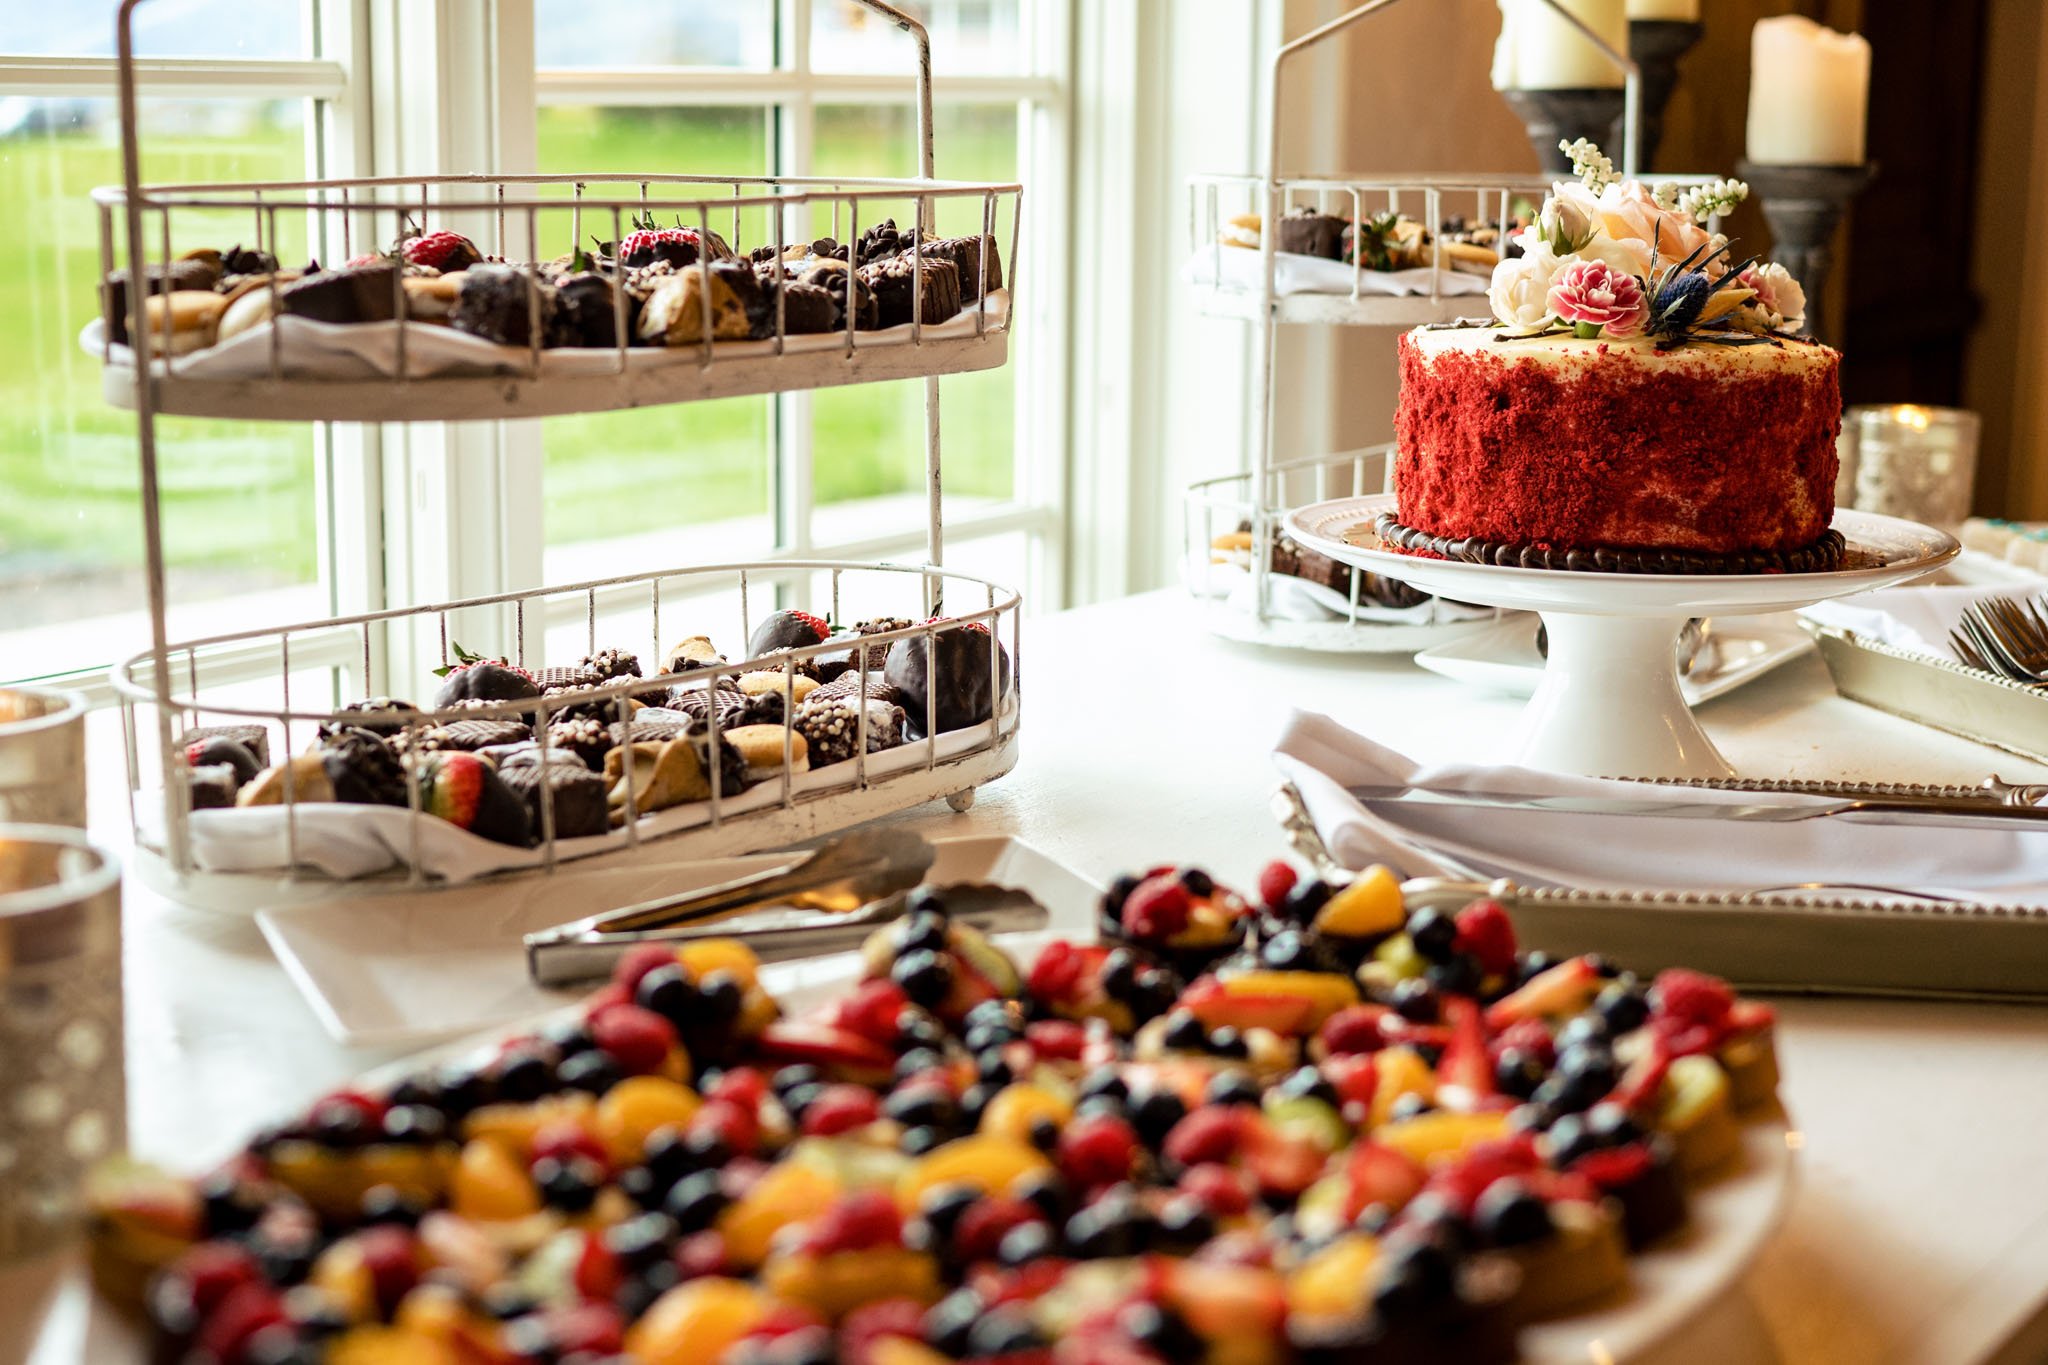 Elegant dessert buffet at an Asheville wedding featuring a red velvet cake on a stand, surrounded by assorted mini desserts, including fruit tarts and chocolate bites, in a room with a view.